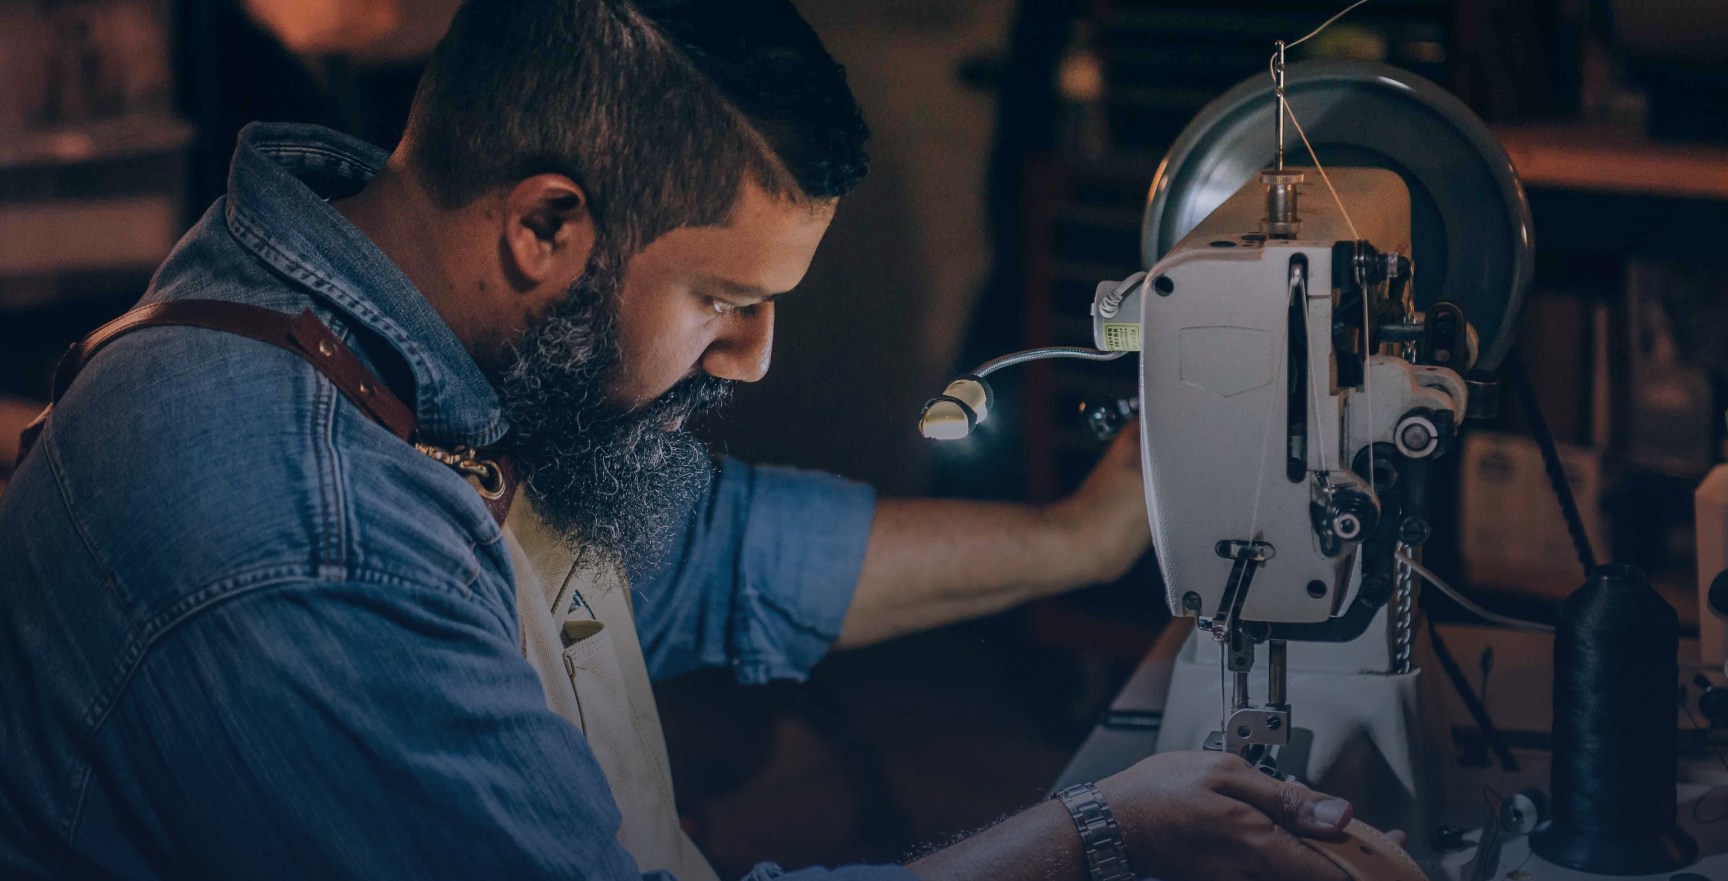 Bearded blue collar man concentrating on pushing fabric through an industrial sewing machine with an overhead, attached mini light.